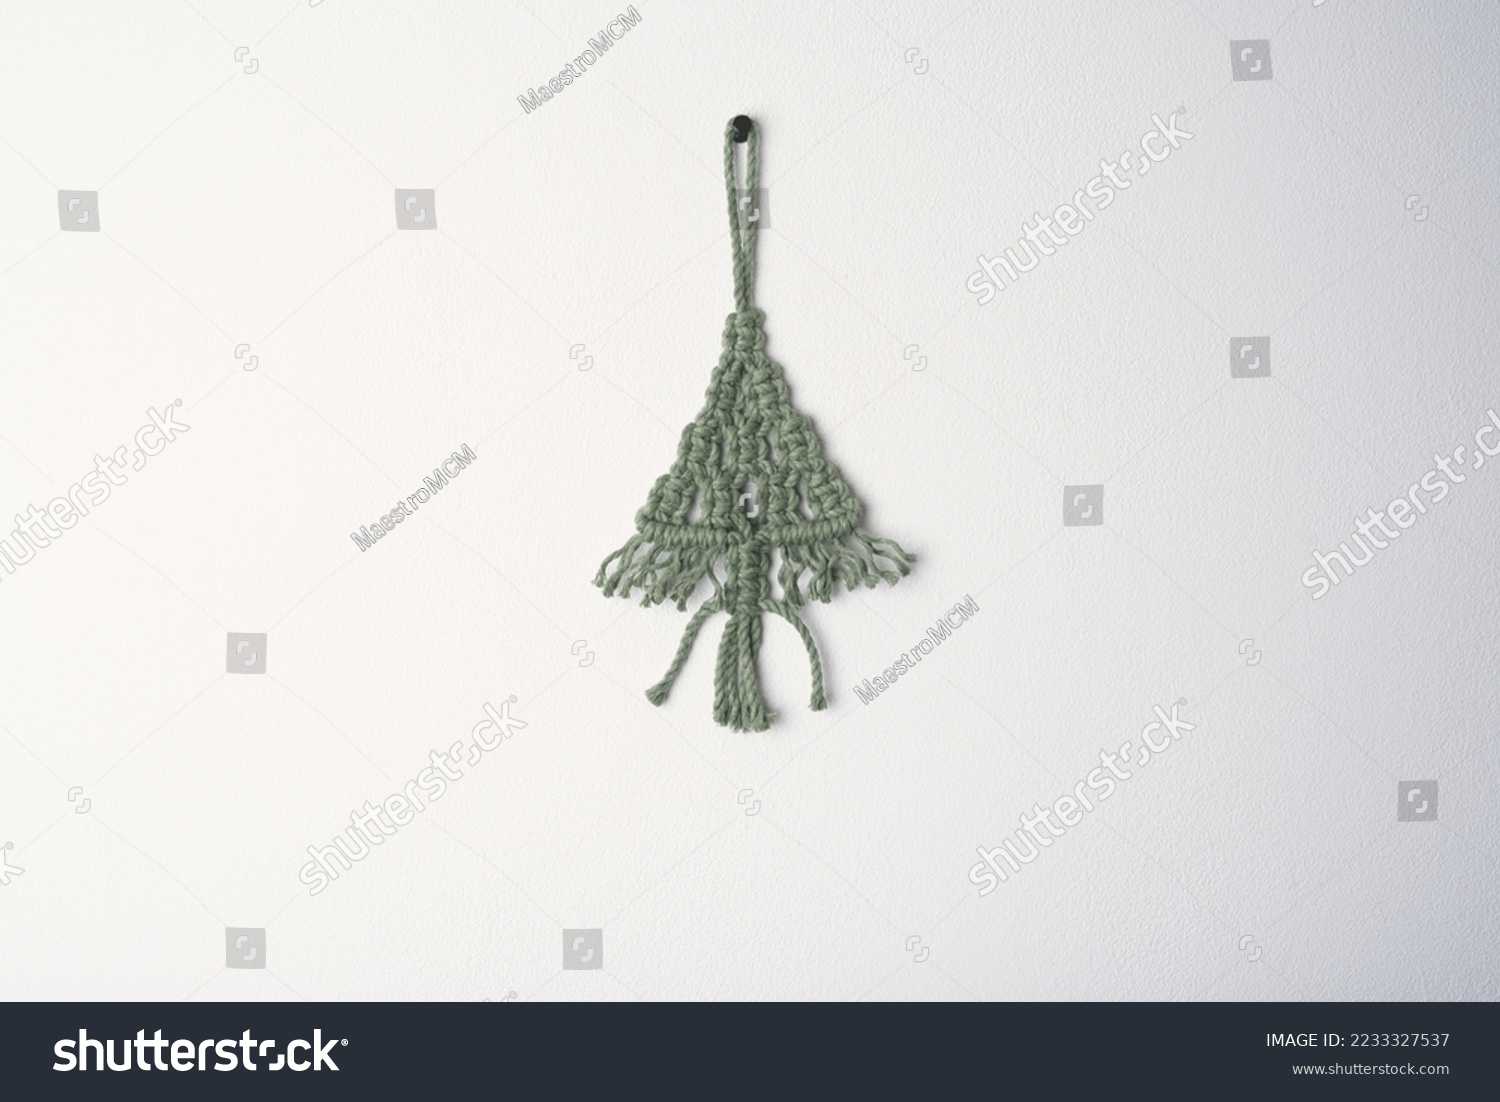 Christmas handmade macrame tree ornament winter holiday, green eco macramé Christmas tree decorations in boho style hanging. tree made from cotton green string on white wall background  #2233327537